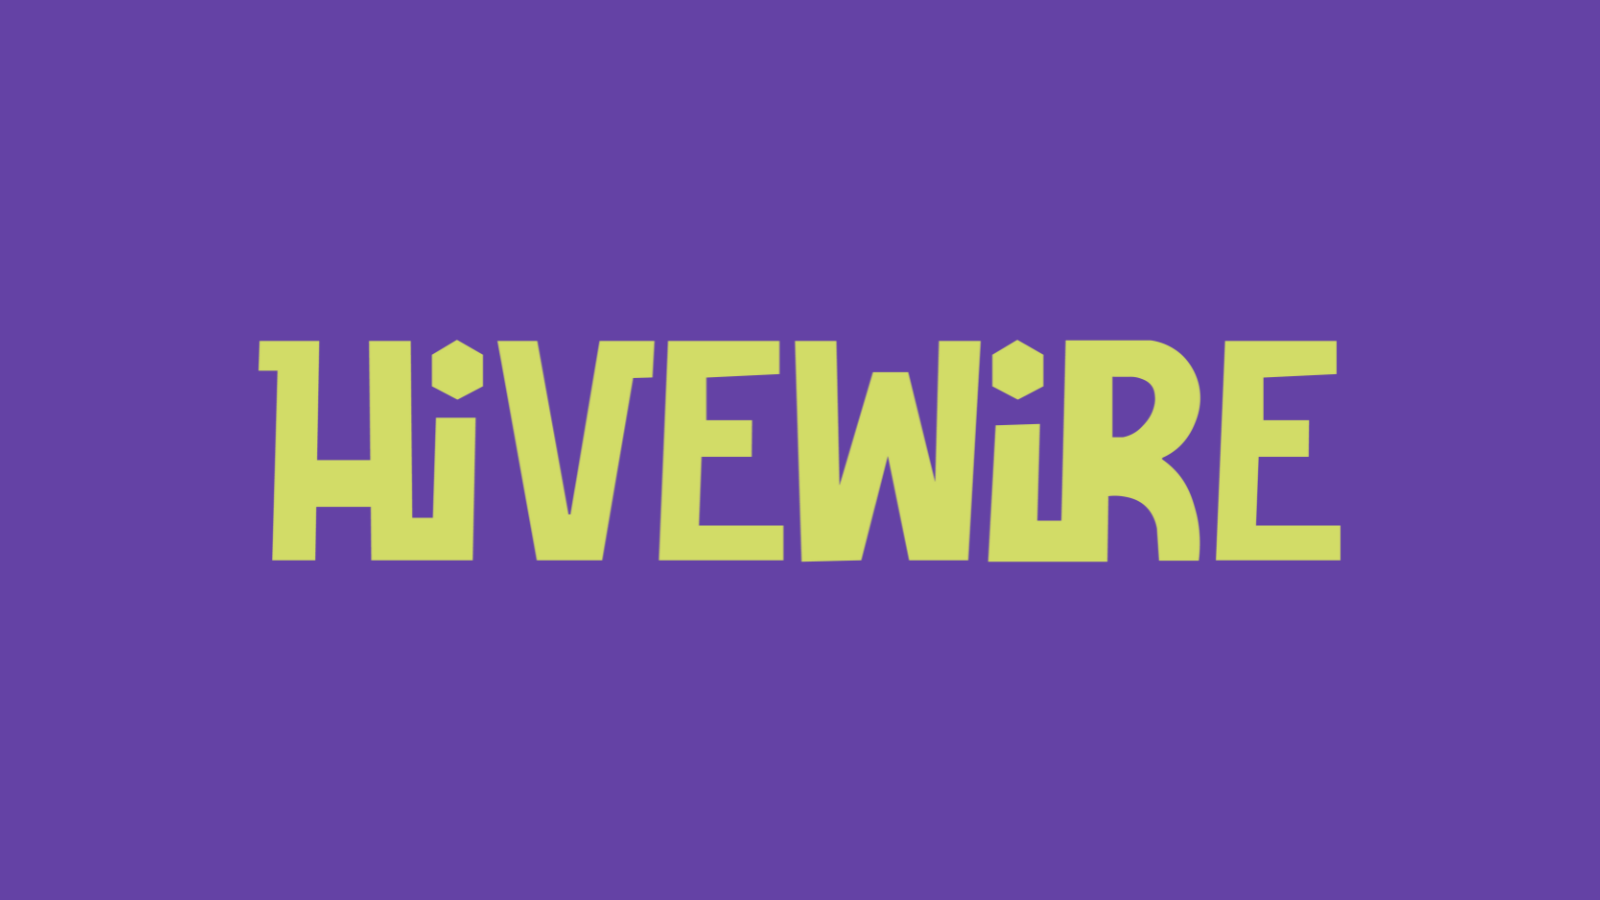 HIVEWIRE IS HERE